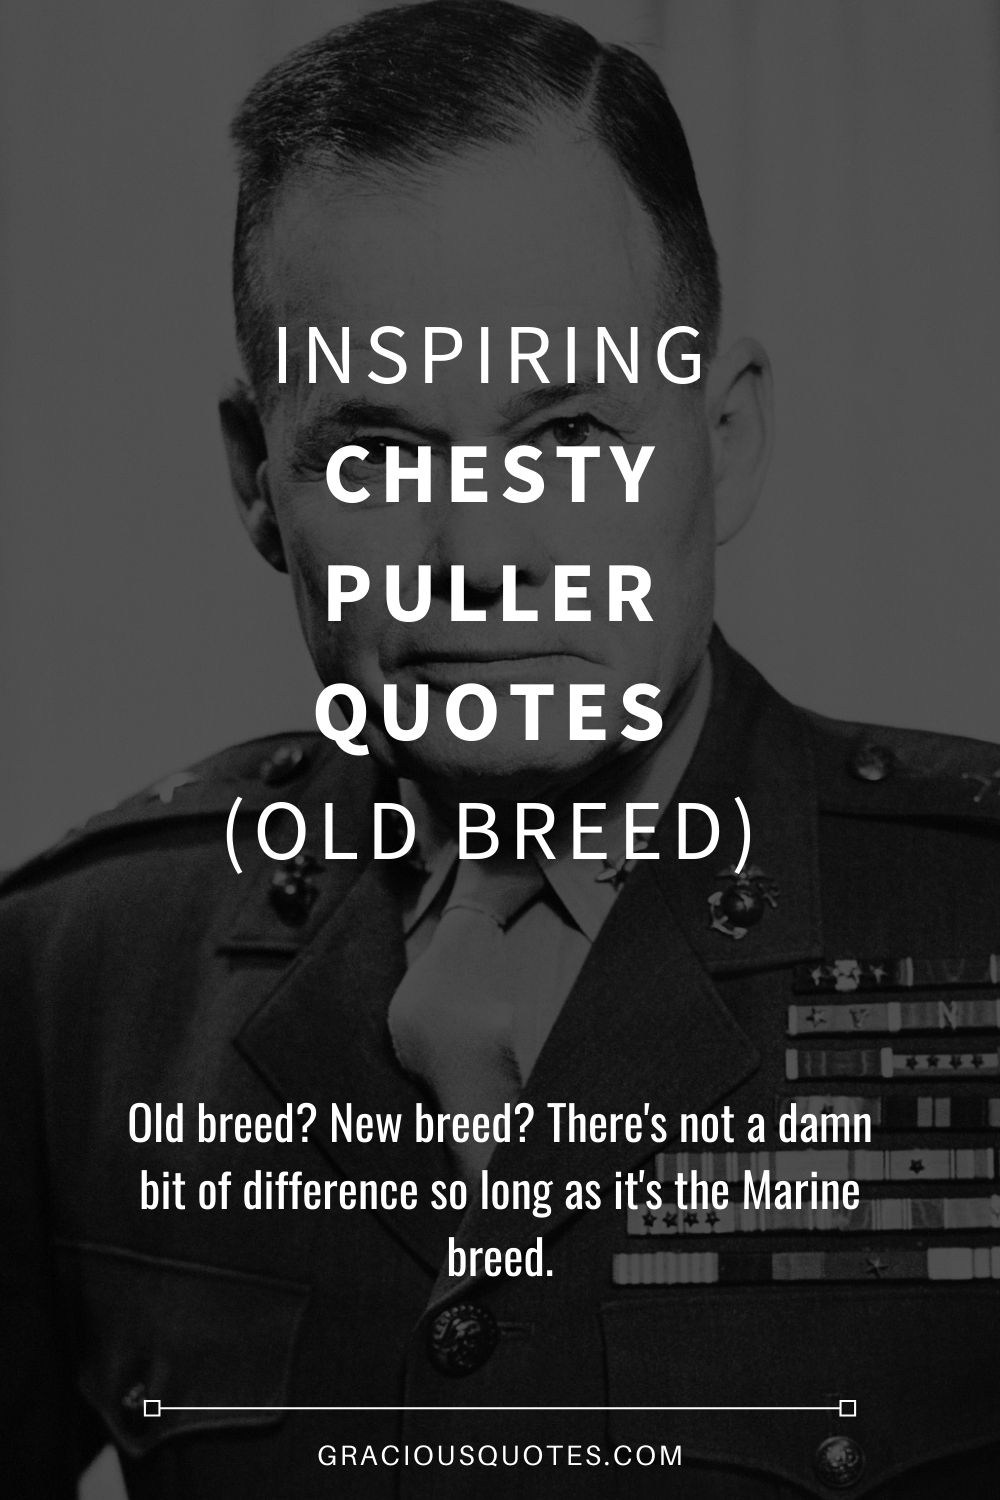 Inspiring Chesty Puller Quotes (OLD BREED) - Gracious Quotes